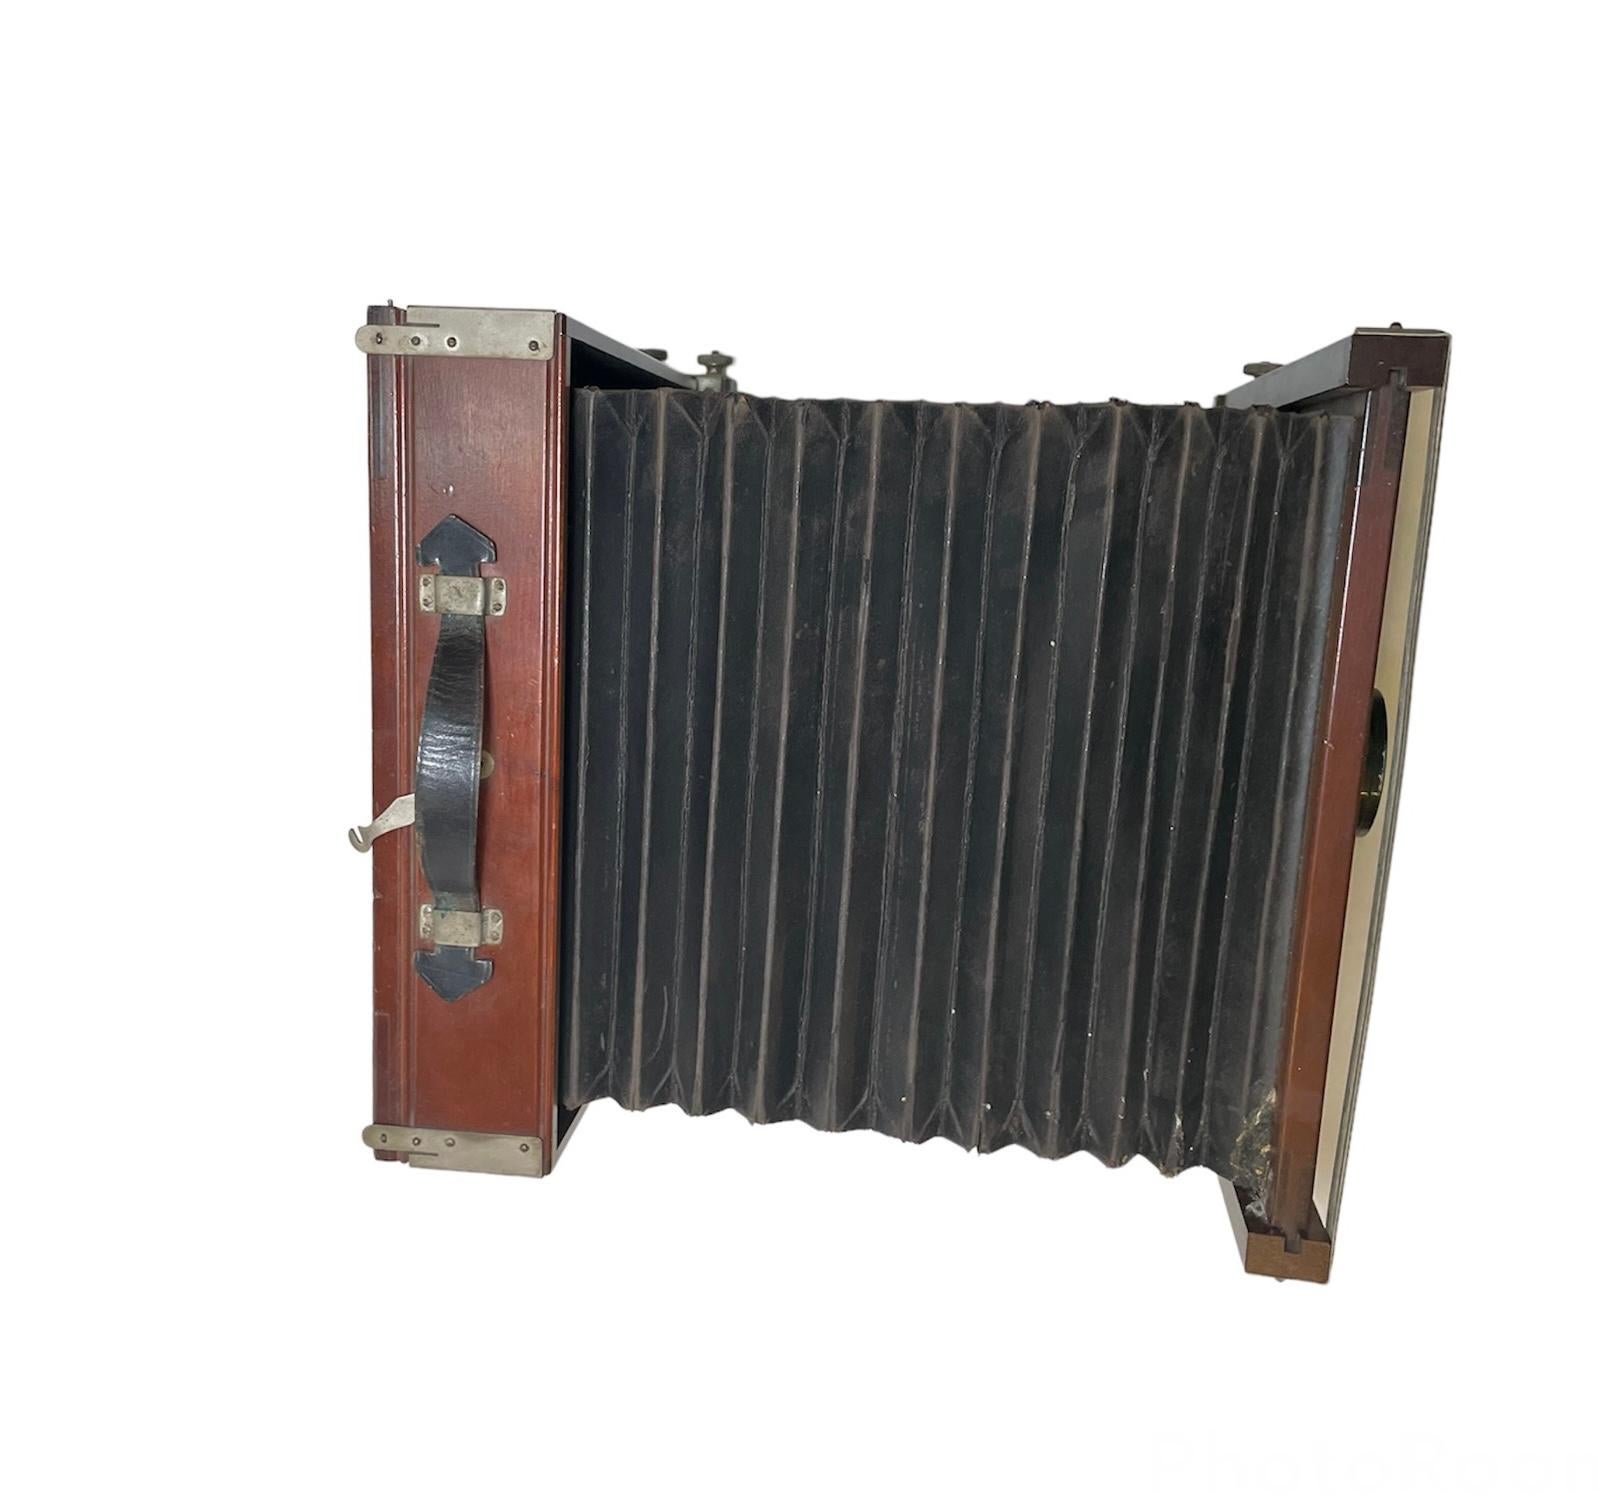 Early 20th Century Korona Home Portrait Camera In Good Condition For Sale In Guaynabo, PR